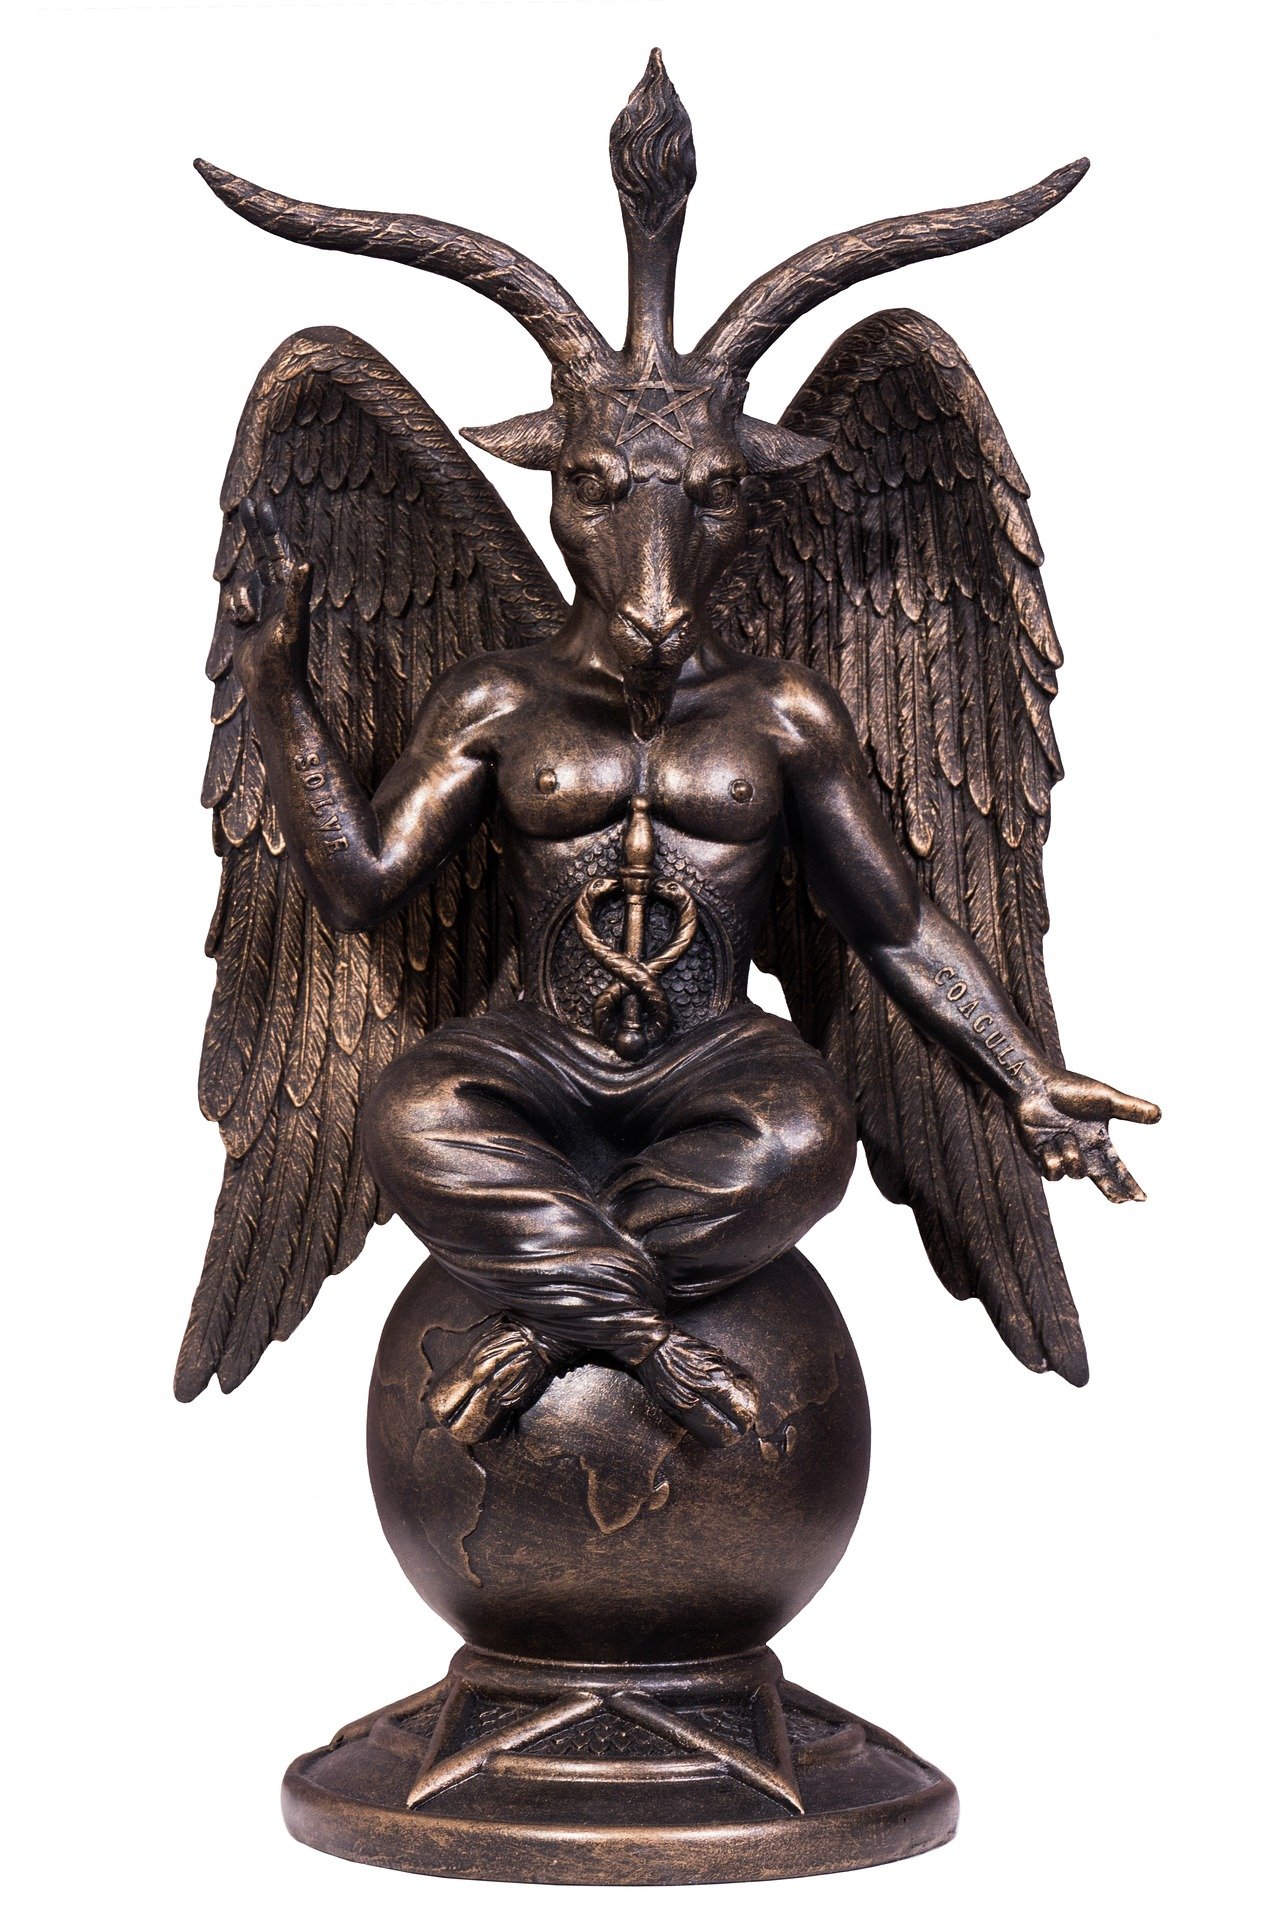 The Brief History of Baphomet; Or My First Occult Related Post